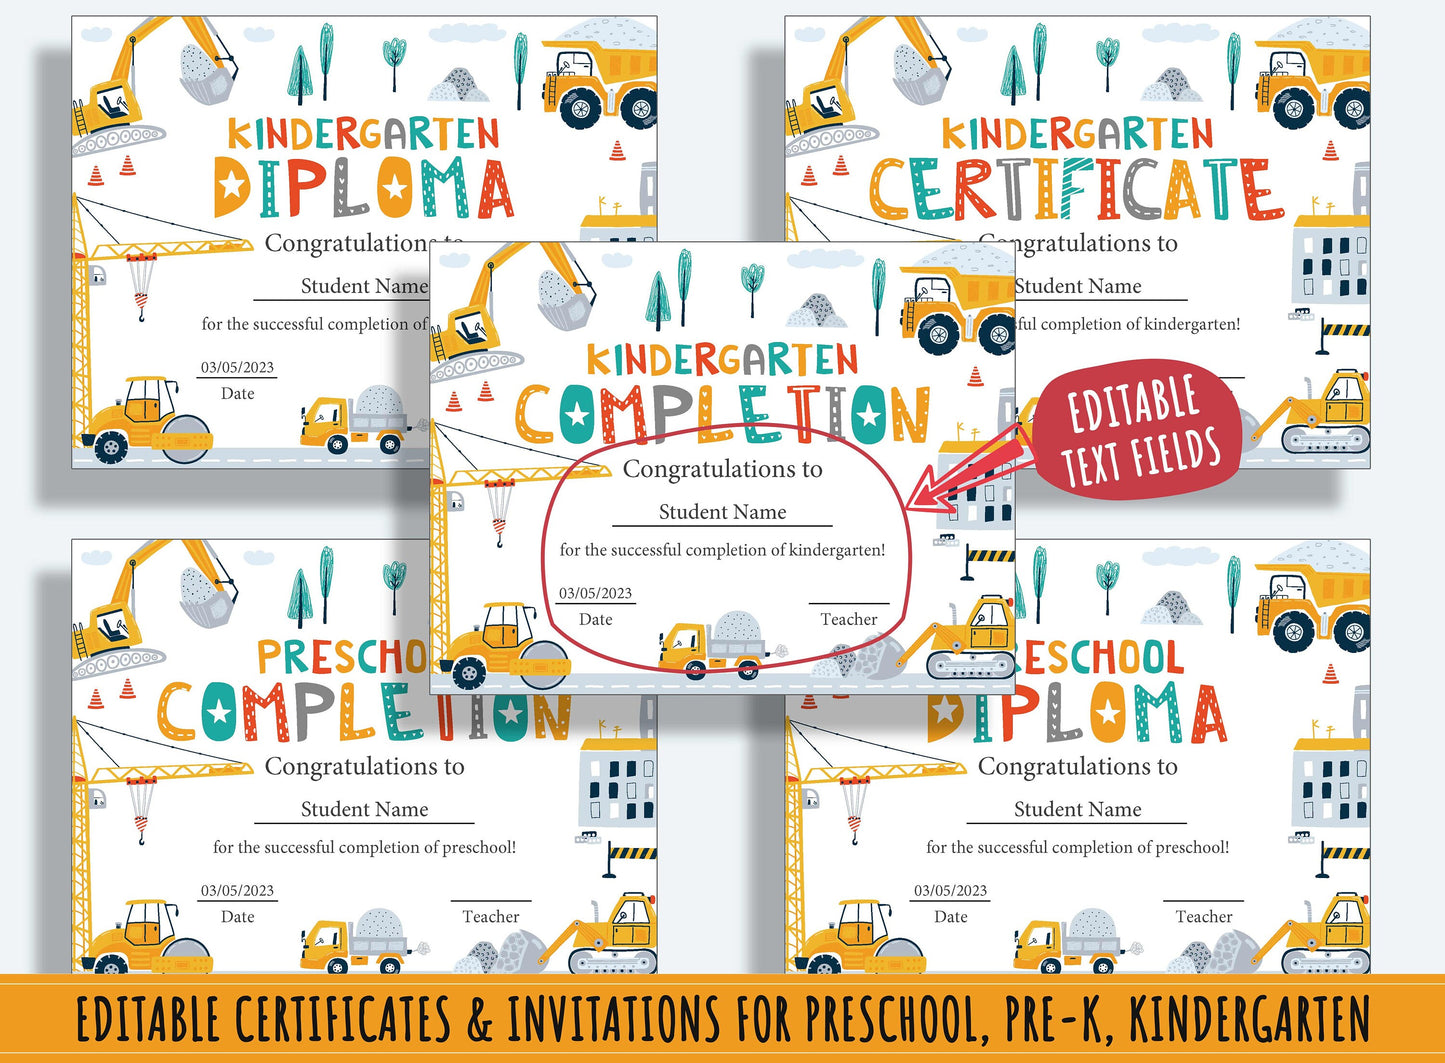 Constructing Success: 37 Editable Pages of Construction-themed Diplomas, Certificates, Invitations for Preschool and Kindergarten, PDF File